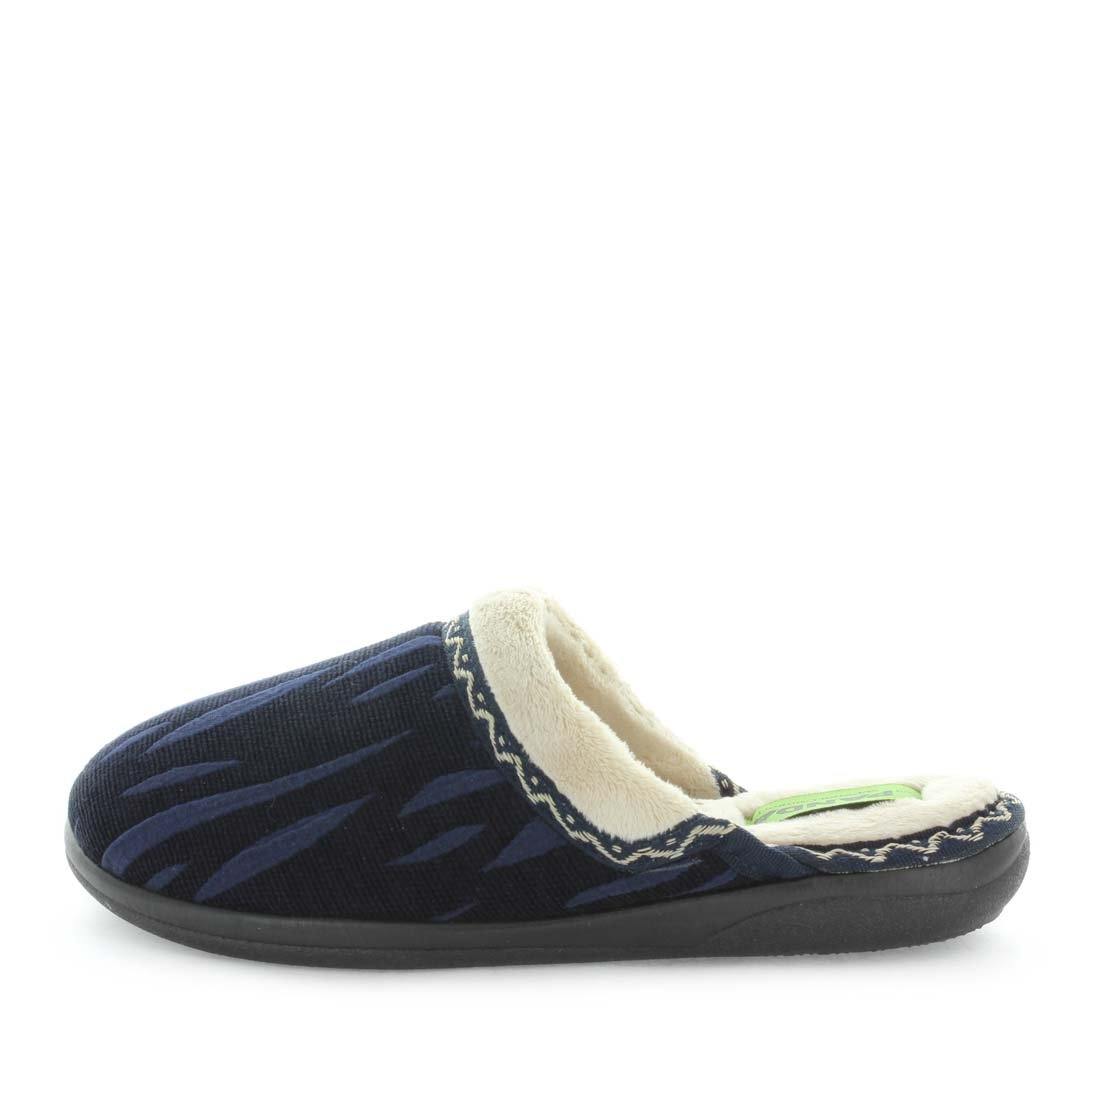 Load image into Gallery viewer, womens slippers - Navy engel slipper, by panda Slippers. A scuff style slipper with a soft, warm lining and sock and extra comfortable fit
